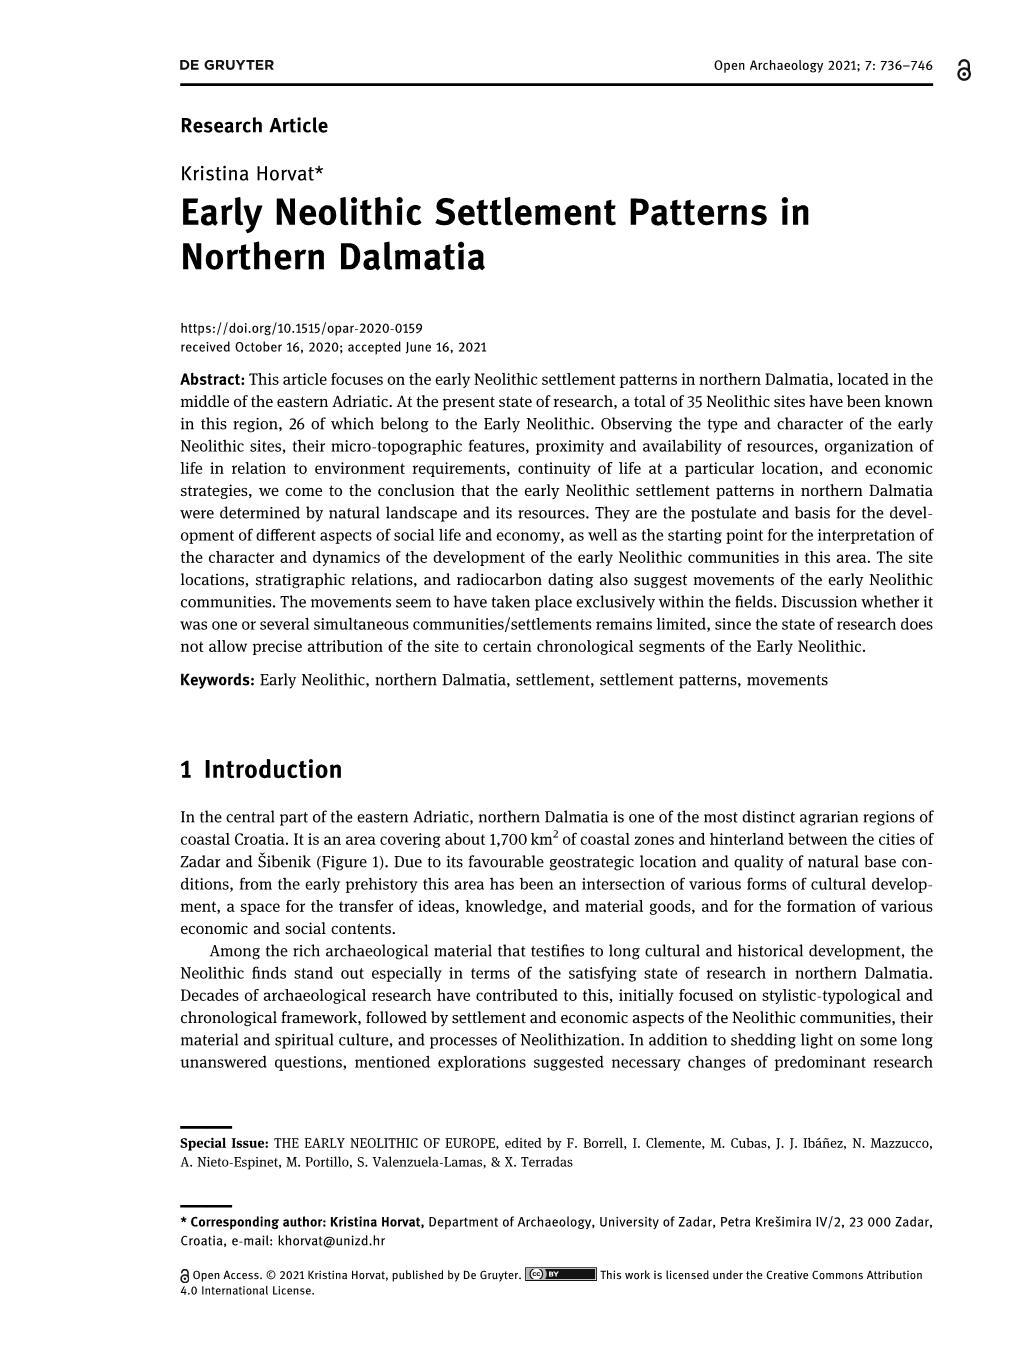 Settlement Patterns in the Early Neolithic